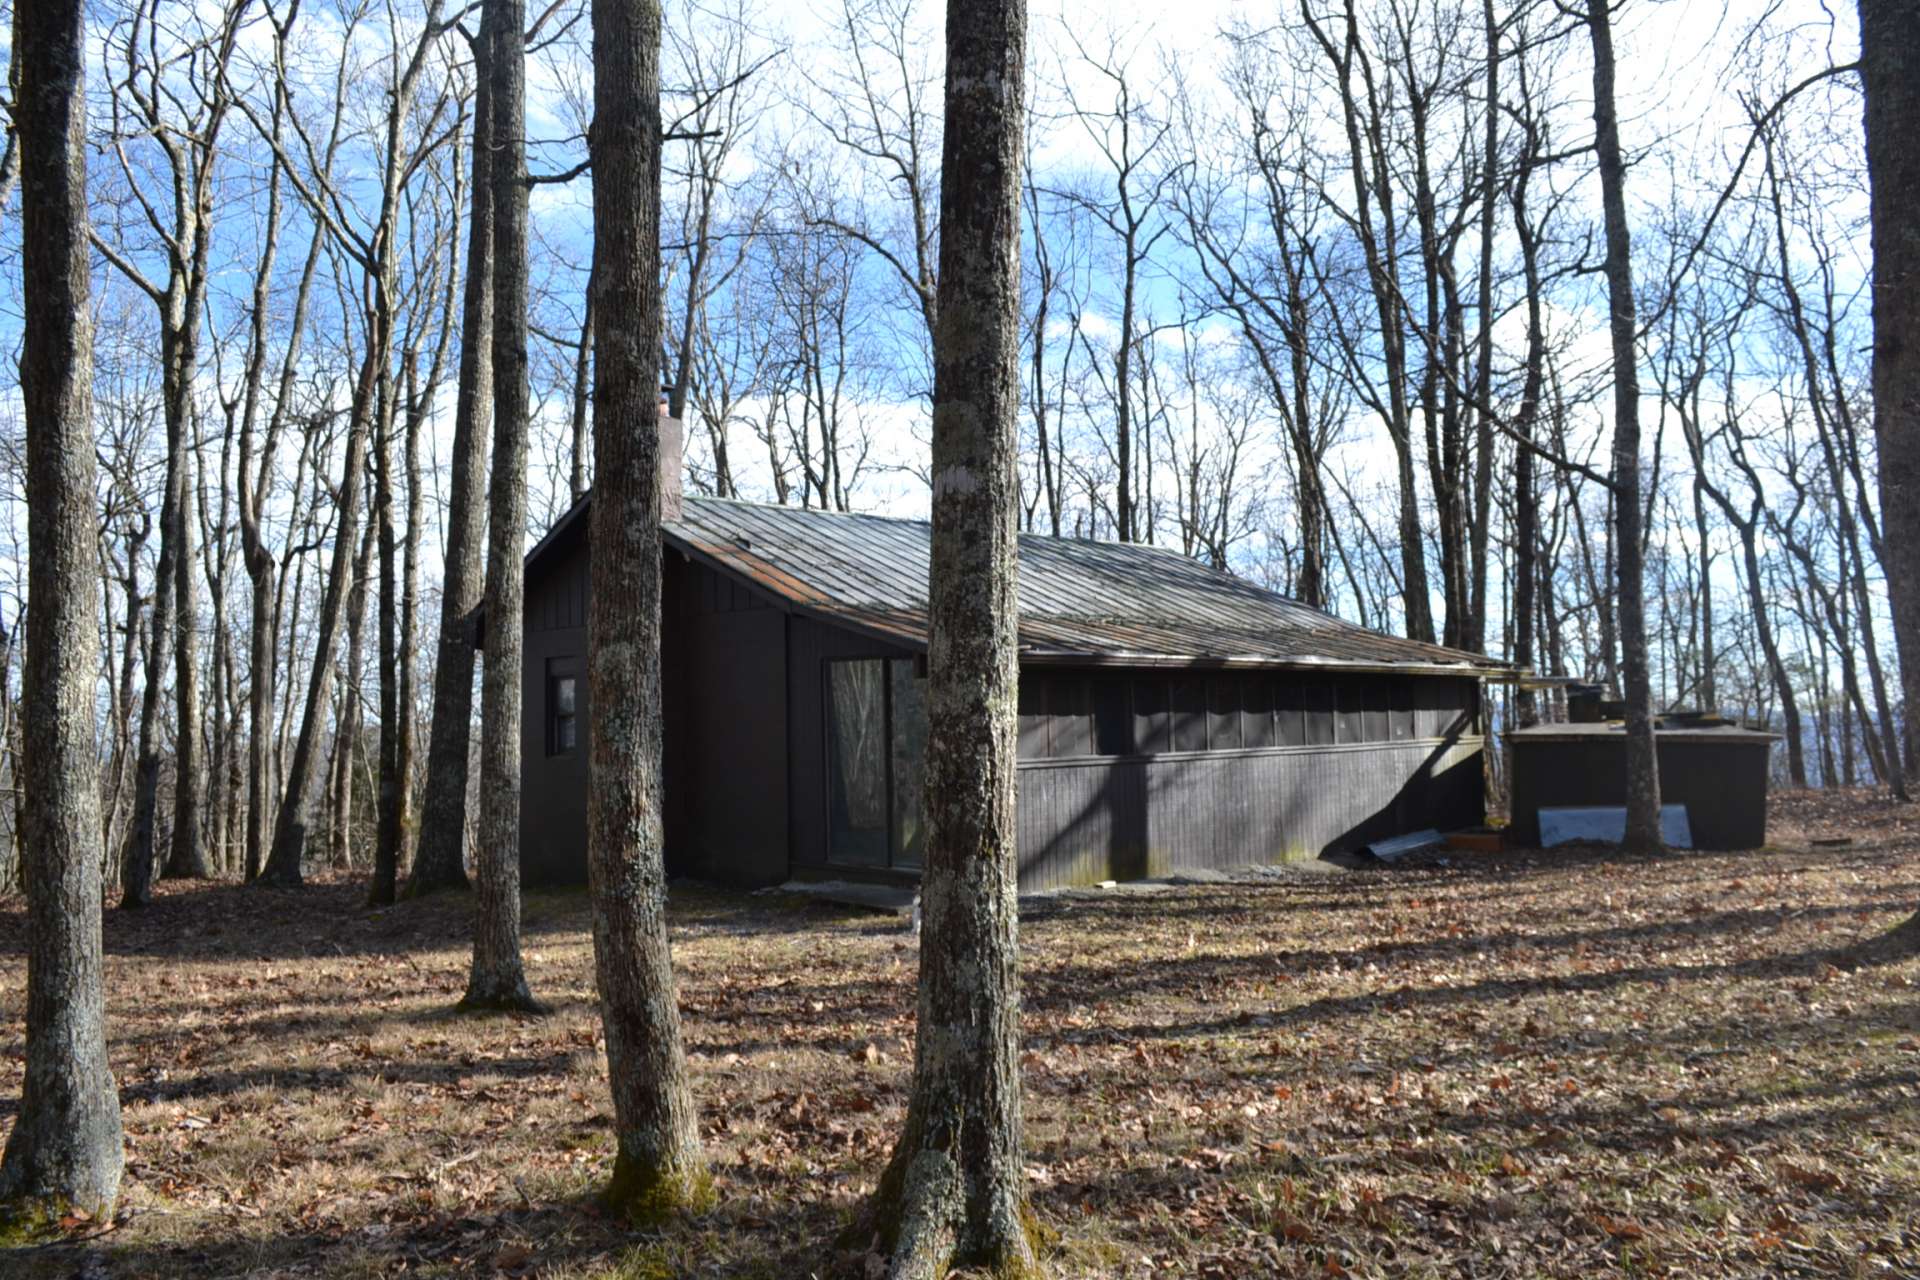 Hidden away beneath tall hardwoods, the modest 2-bedroom, 1-bath cabin is perfect for a rustic mountain retreat or hunting cabin for an off the grid experience.